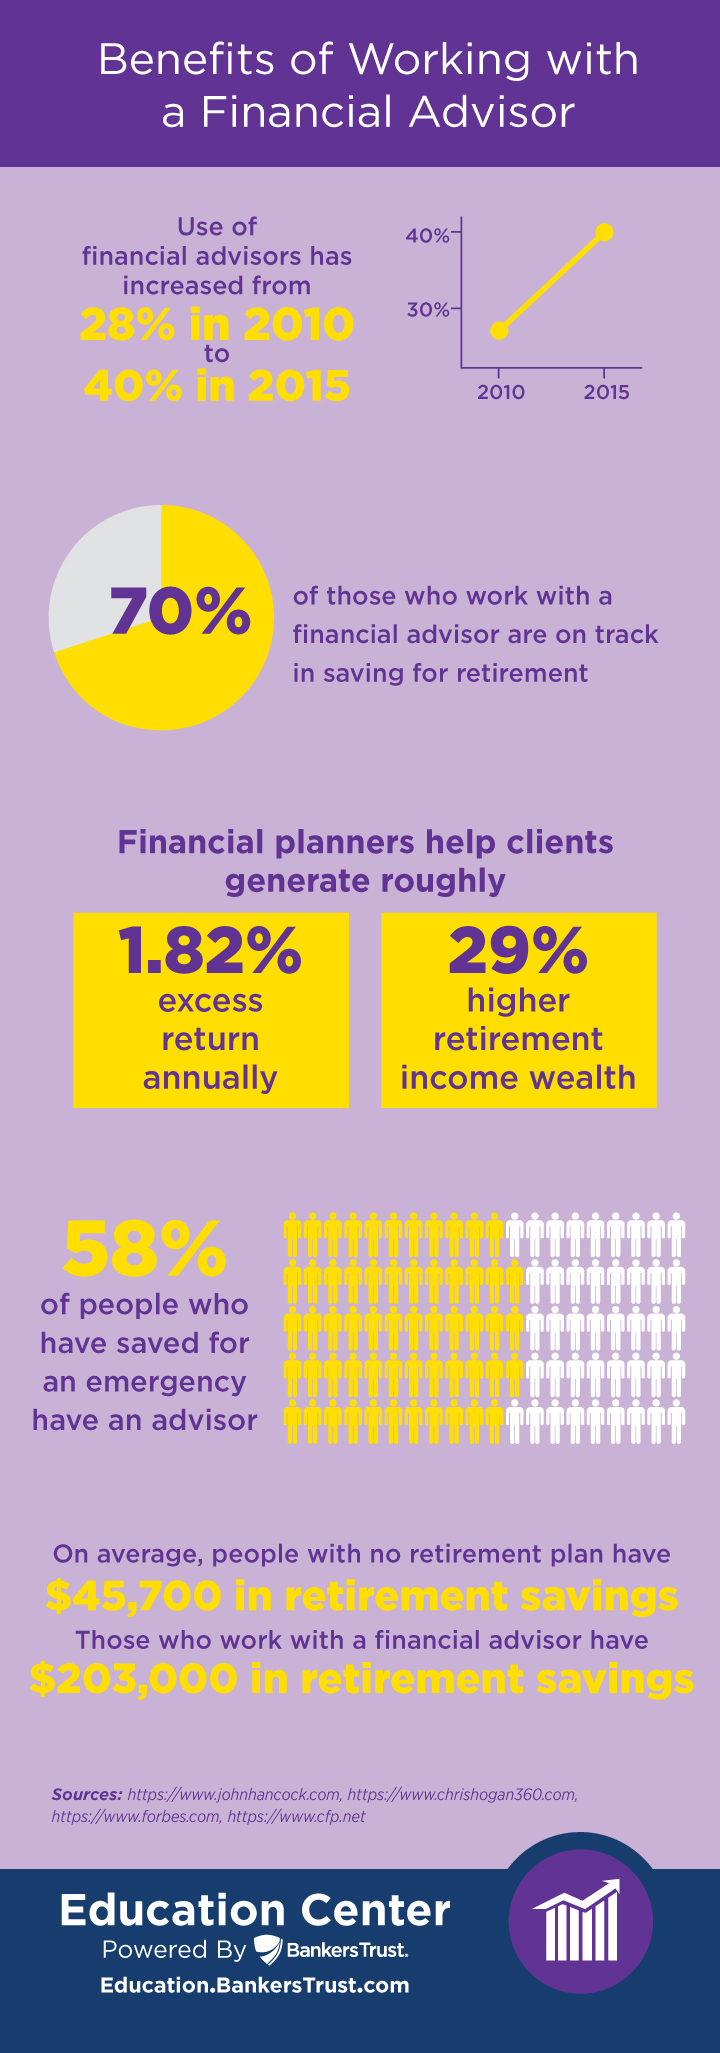 Benefits of working with a financial advisor infographic